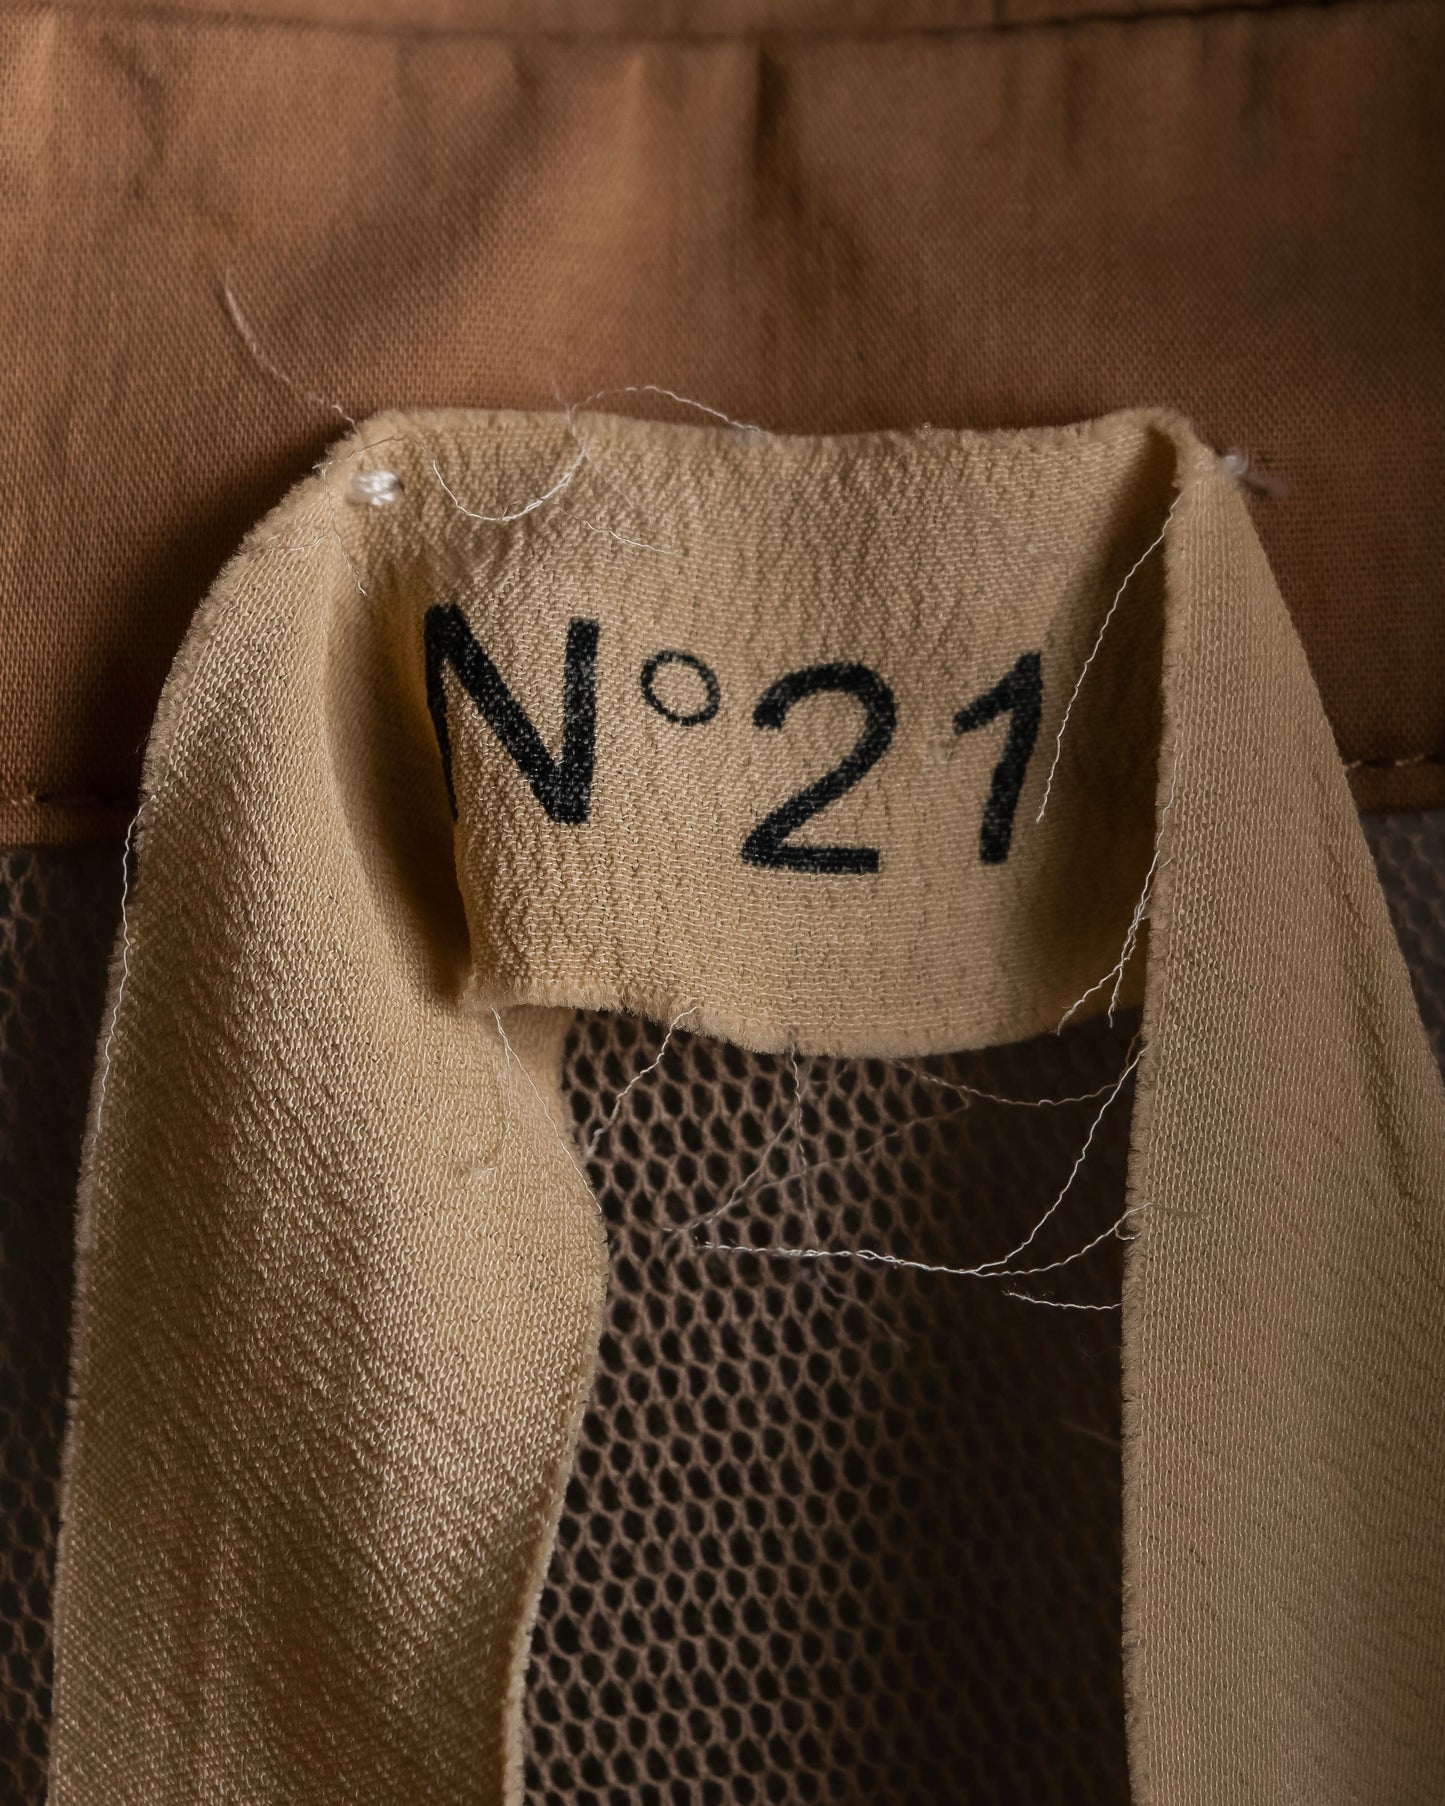 "Ｎ21 NUMEROVENTUNO" Switching design concealed shirt